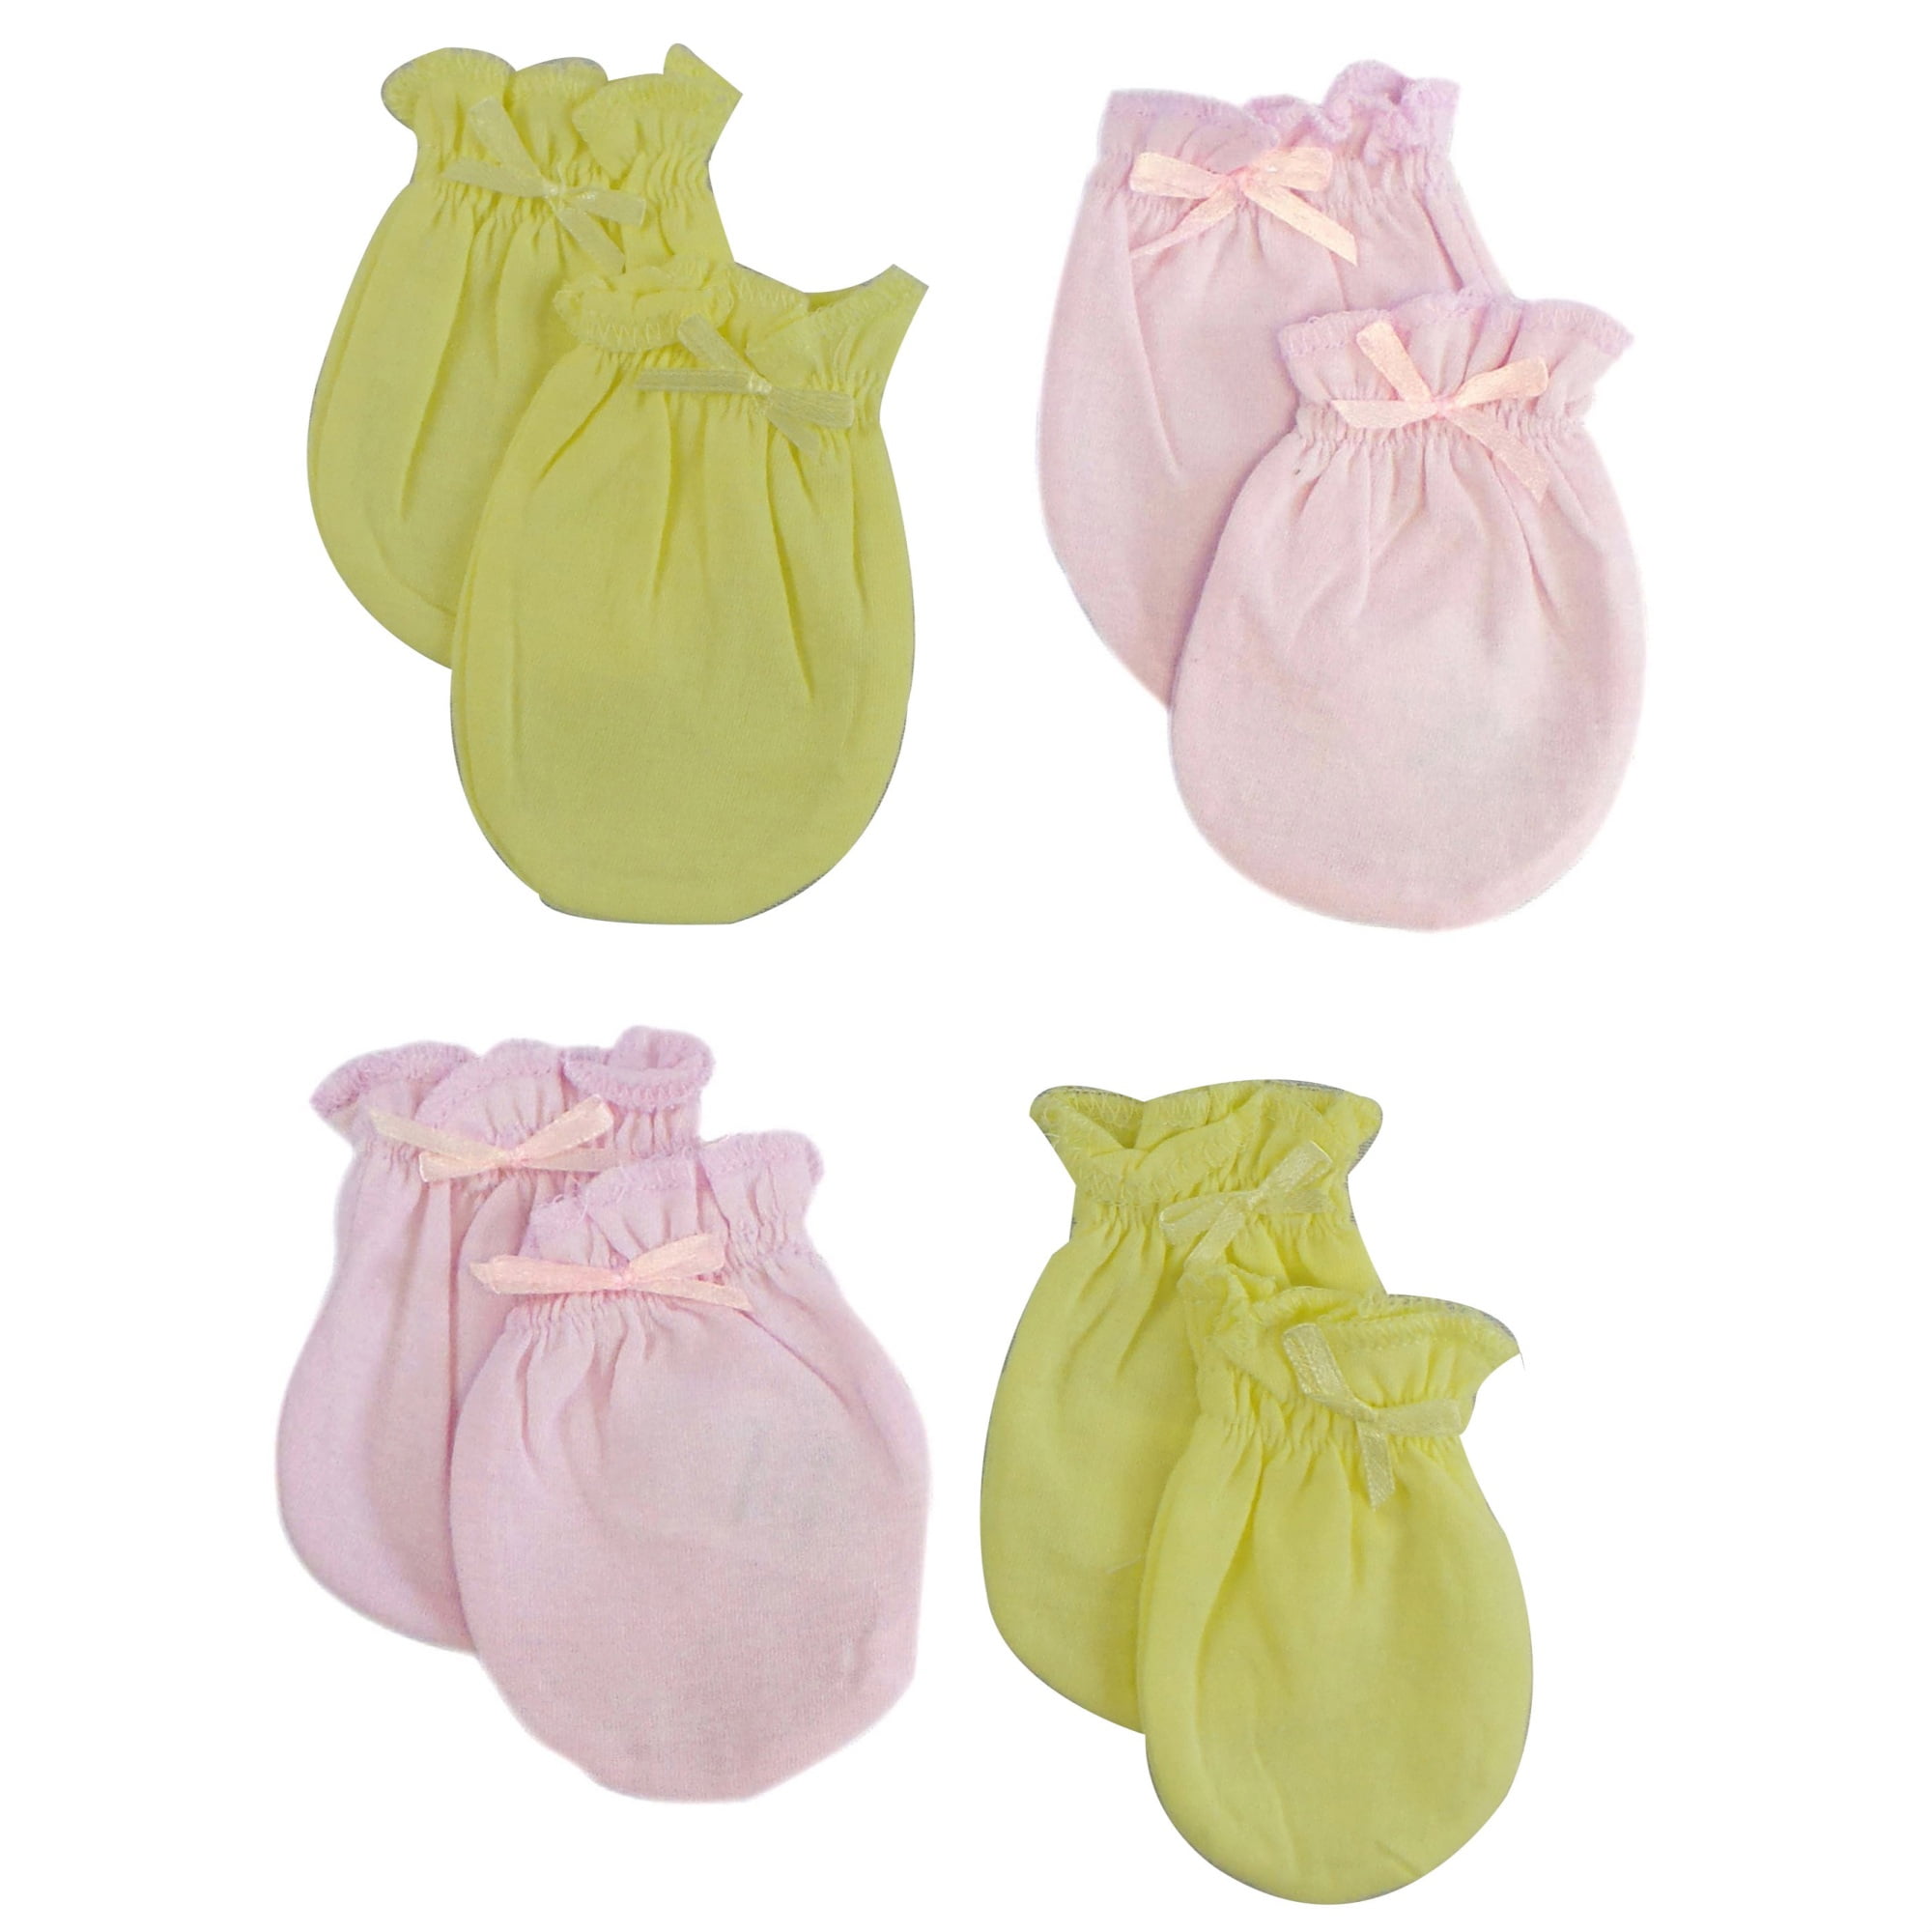 116-pink-yellow-4-pack Infant Mittens, Pink & Yellow - Pack Of 4